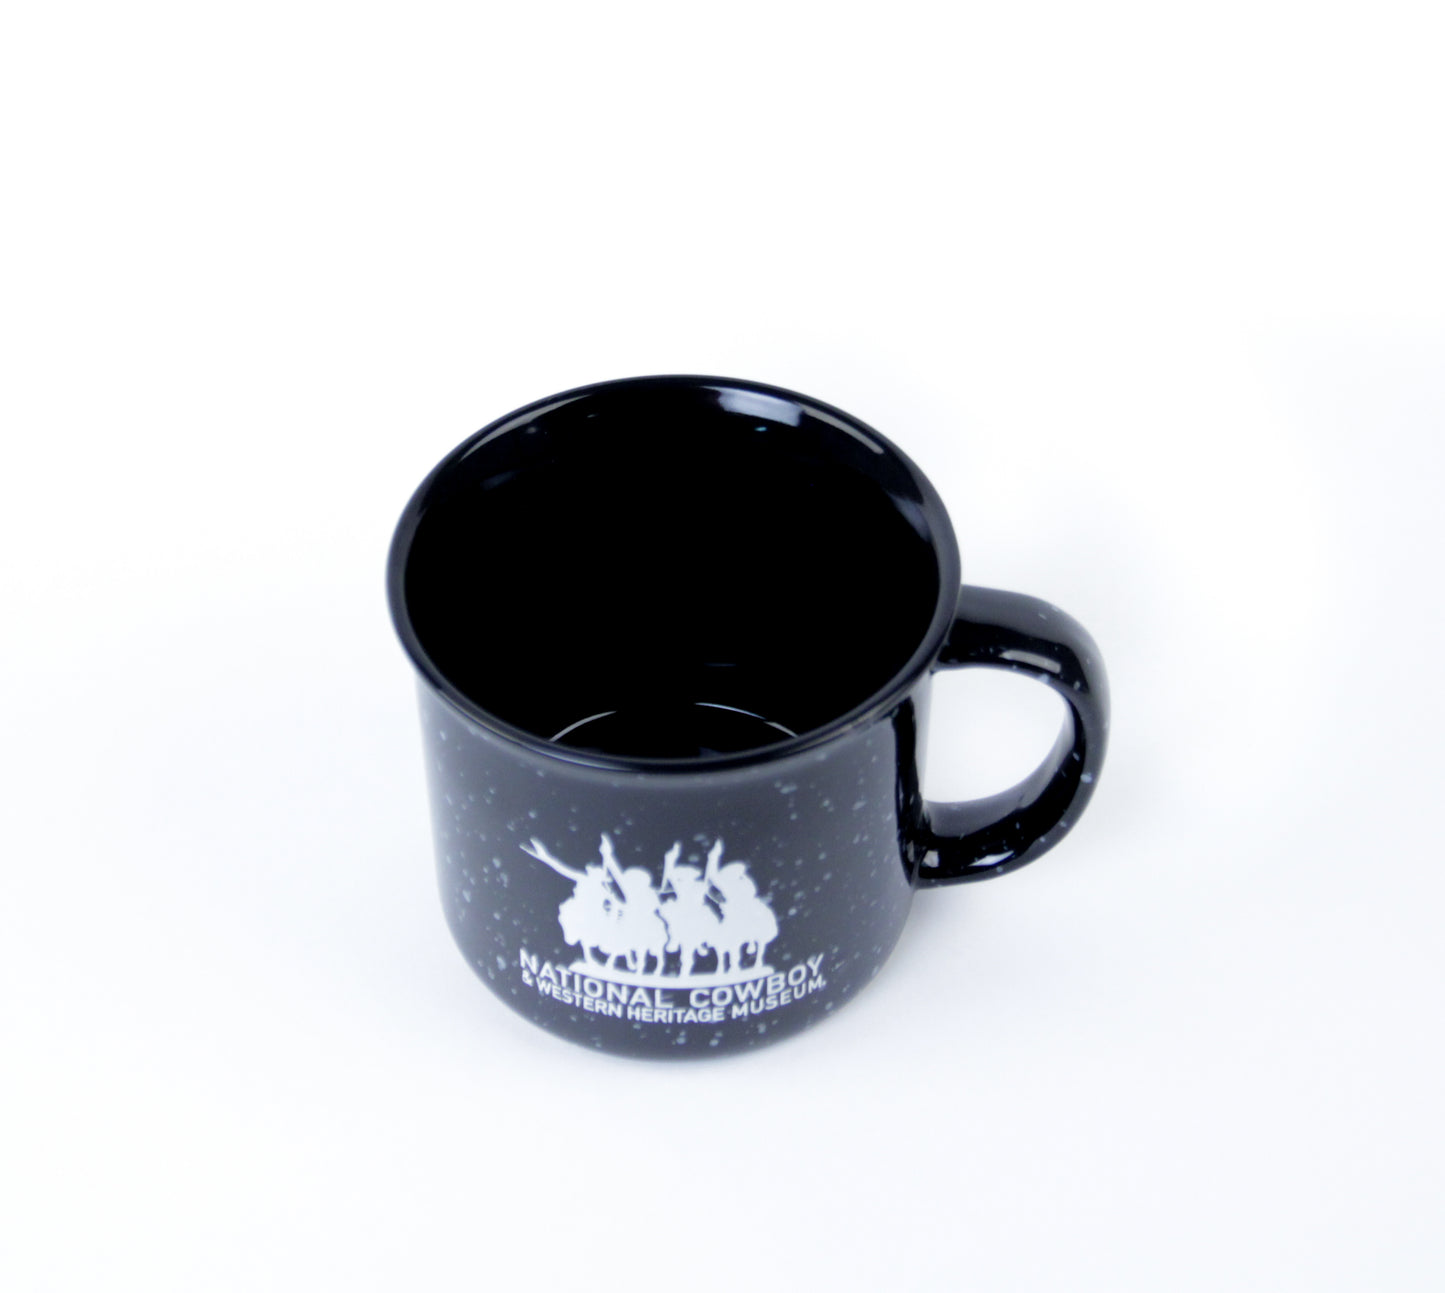 National Cowboy Museum black campfire mug ceramic coffee hot tea or soup cup drink in the morning like a cowboy ceramic glass 14 ounces